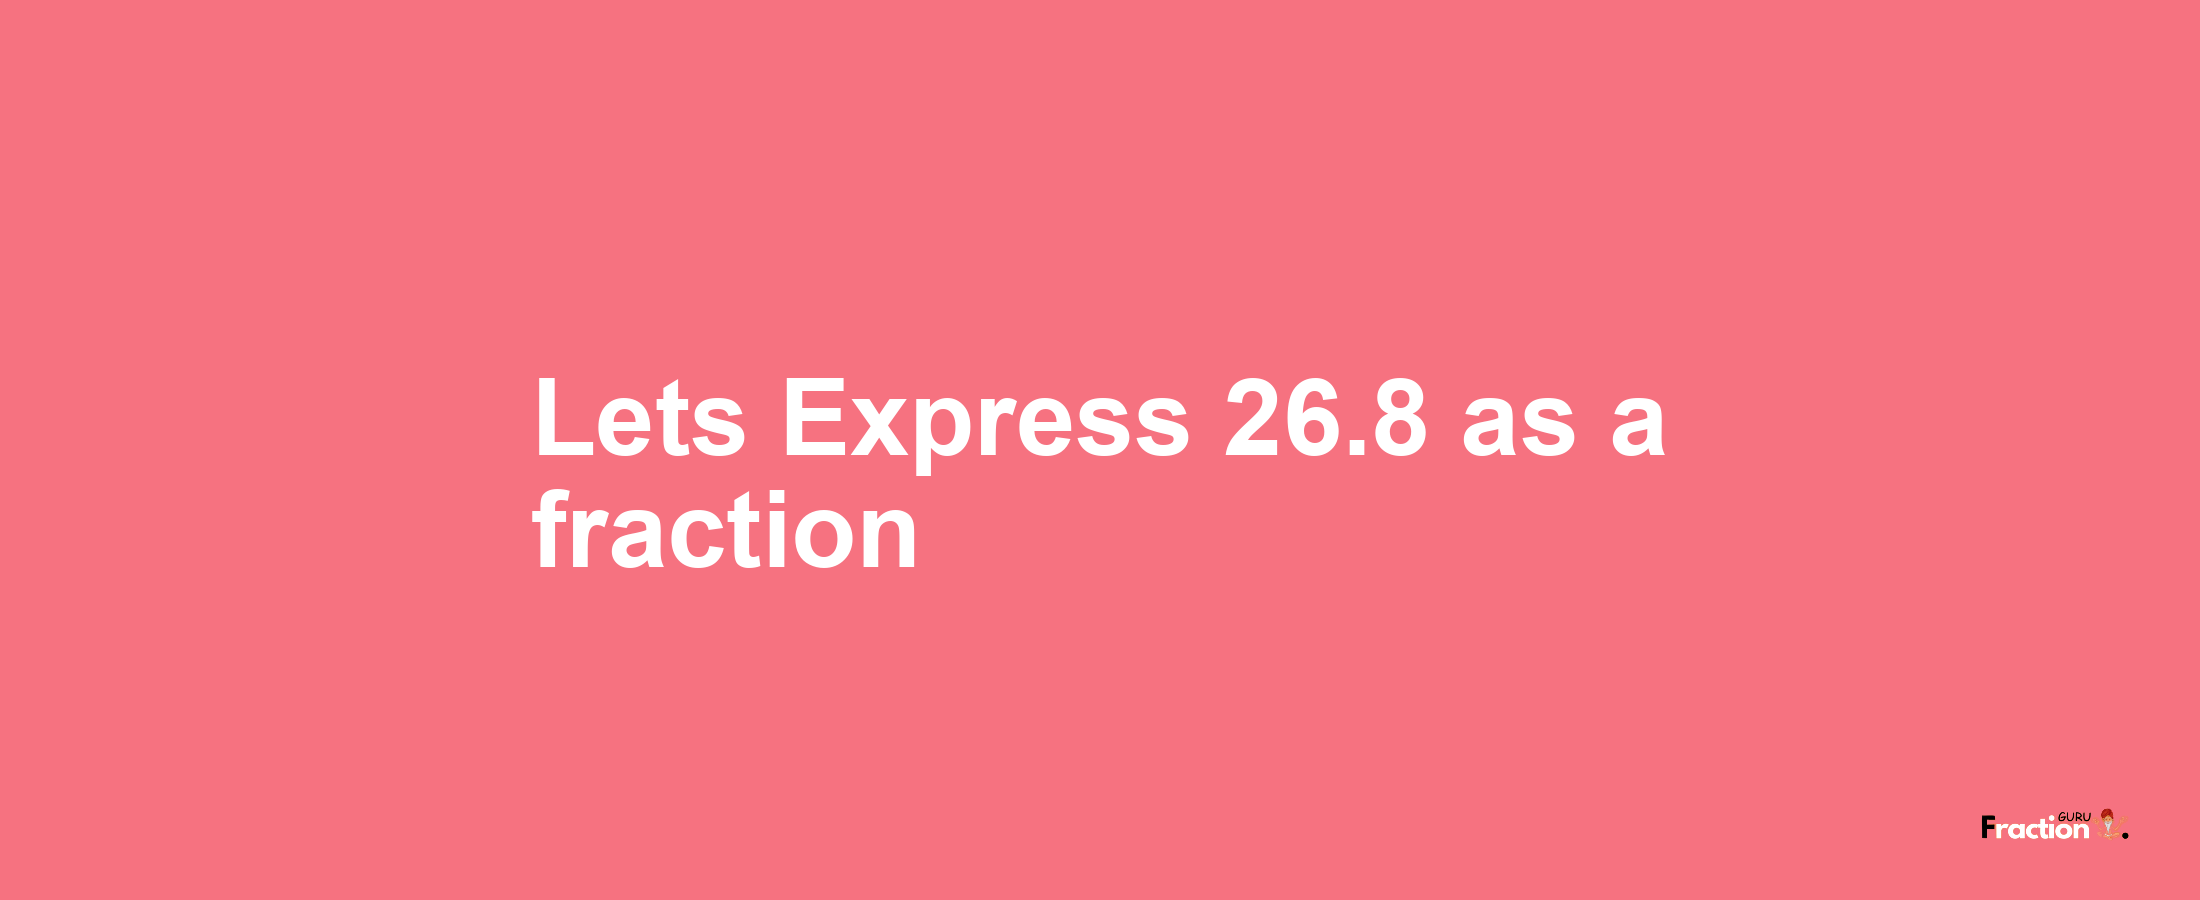 Lets Express 26.8 as afraction